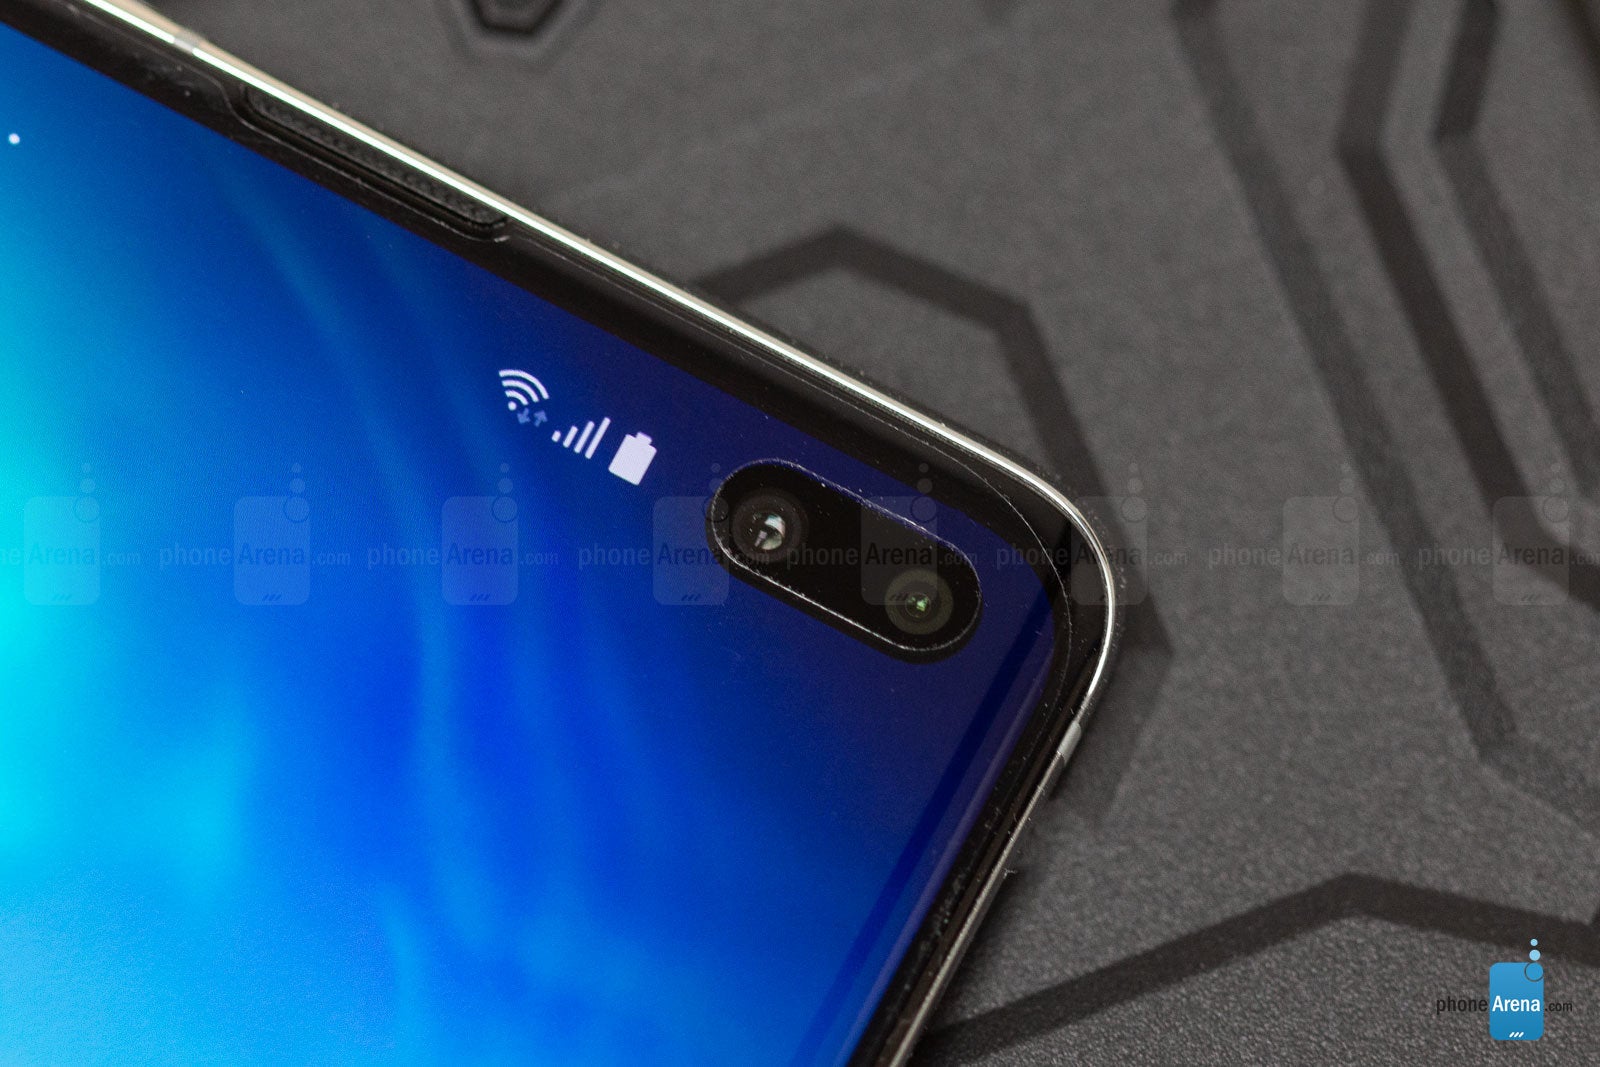 The S10 and S10+ already come with Samsung's official screen protector out of the box - Samsung: the best Galaxy S10 screen protector comes pre-installed, don't mess it up